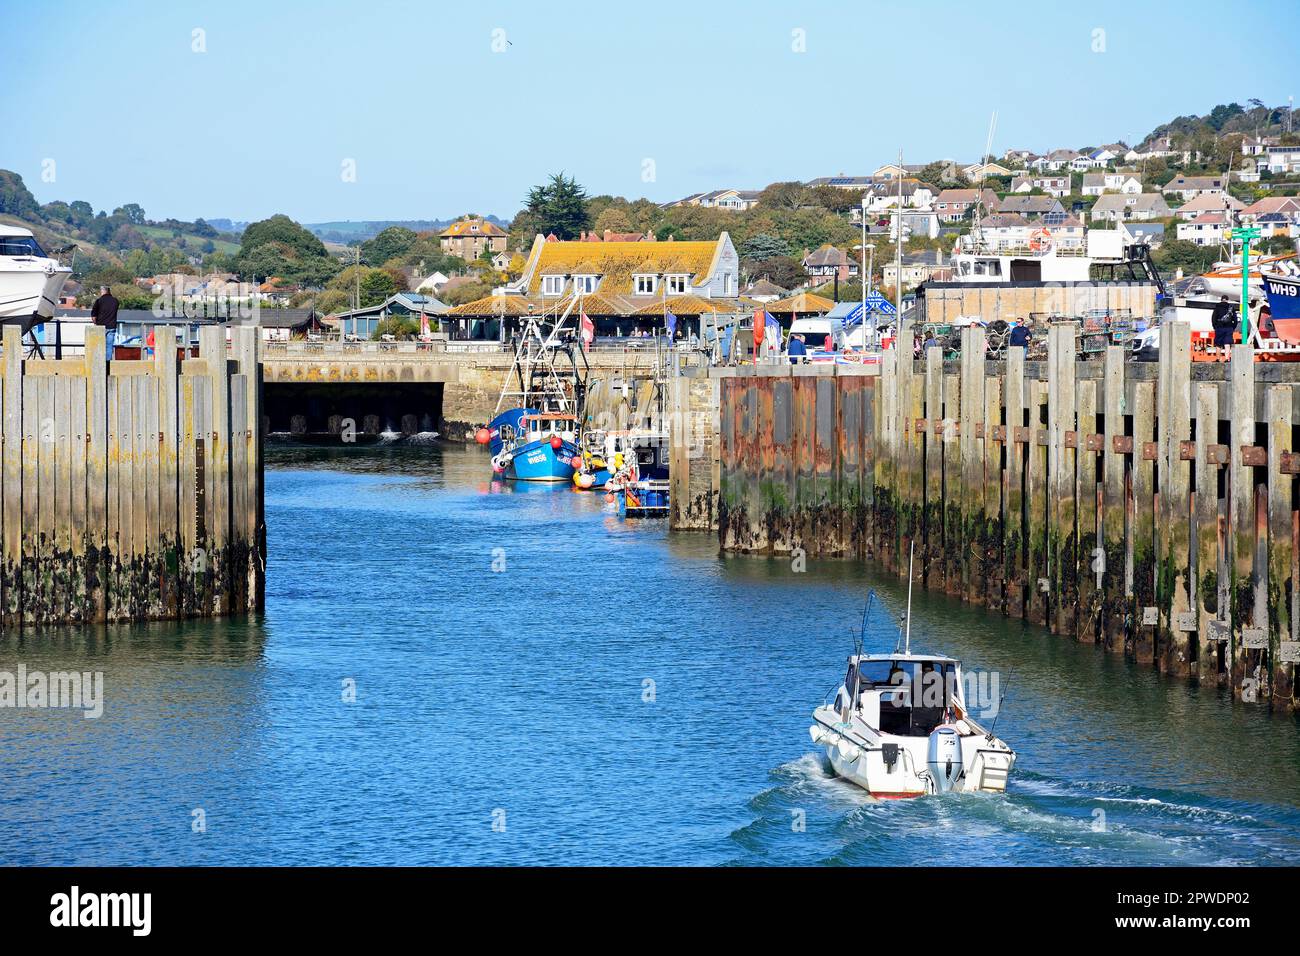 Boat entering the harbour with the sluice gate and town buildings to the rear, West Bay, Dorset, UK, Europe. Stock Photo